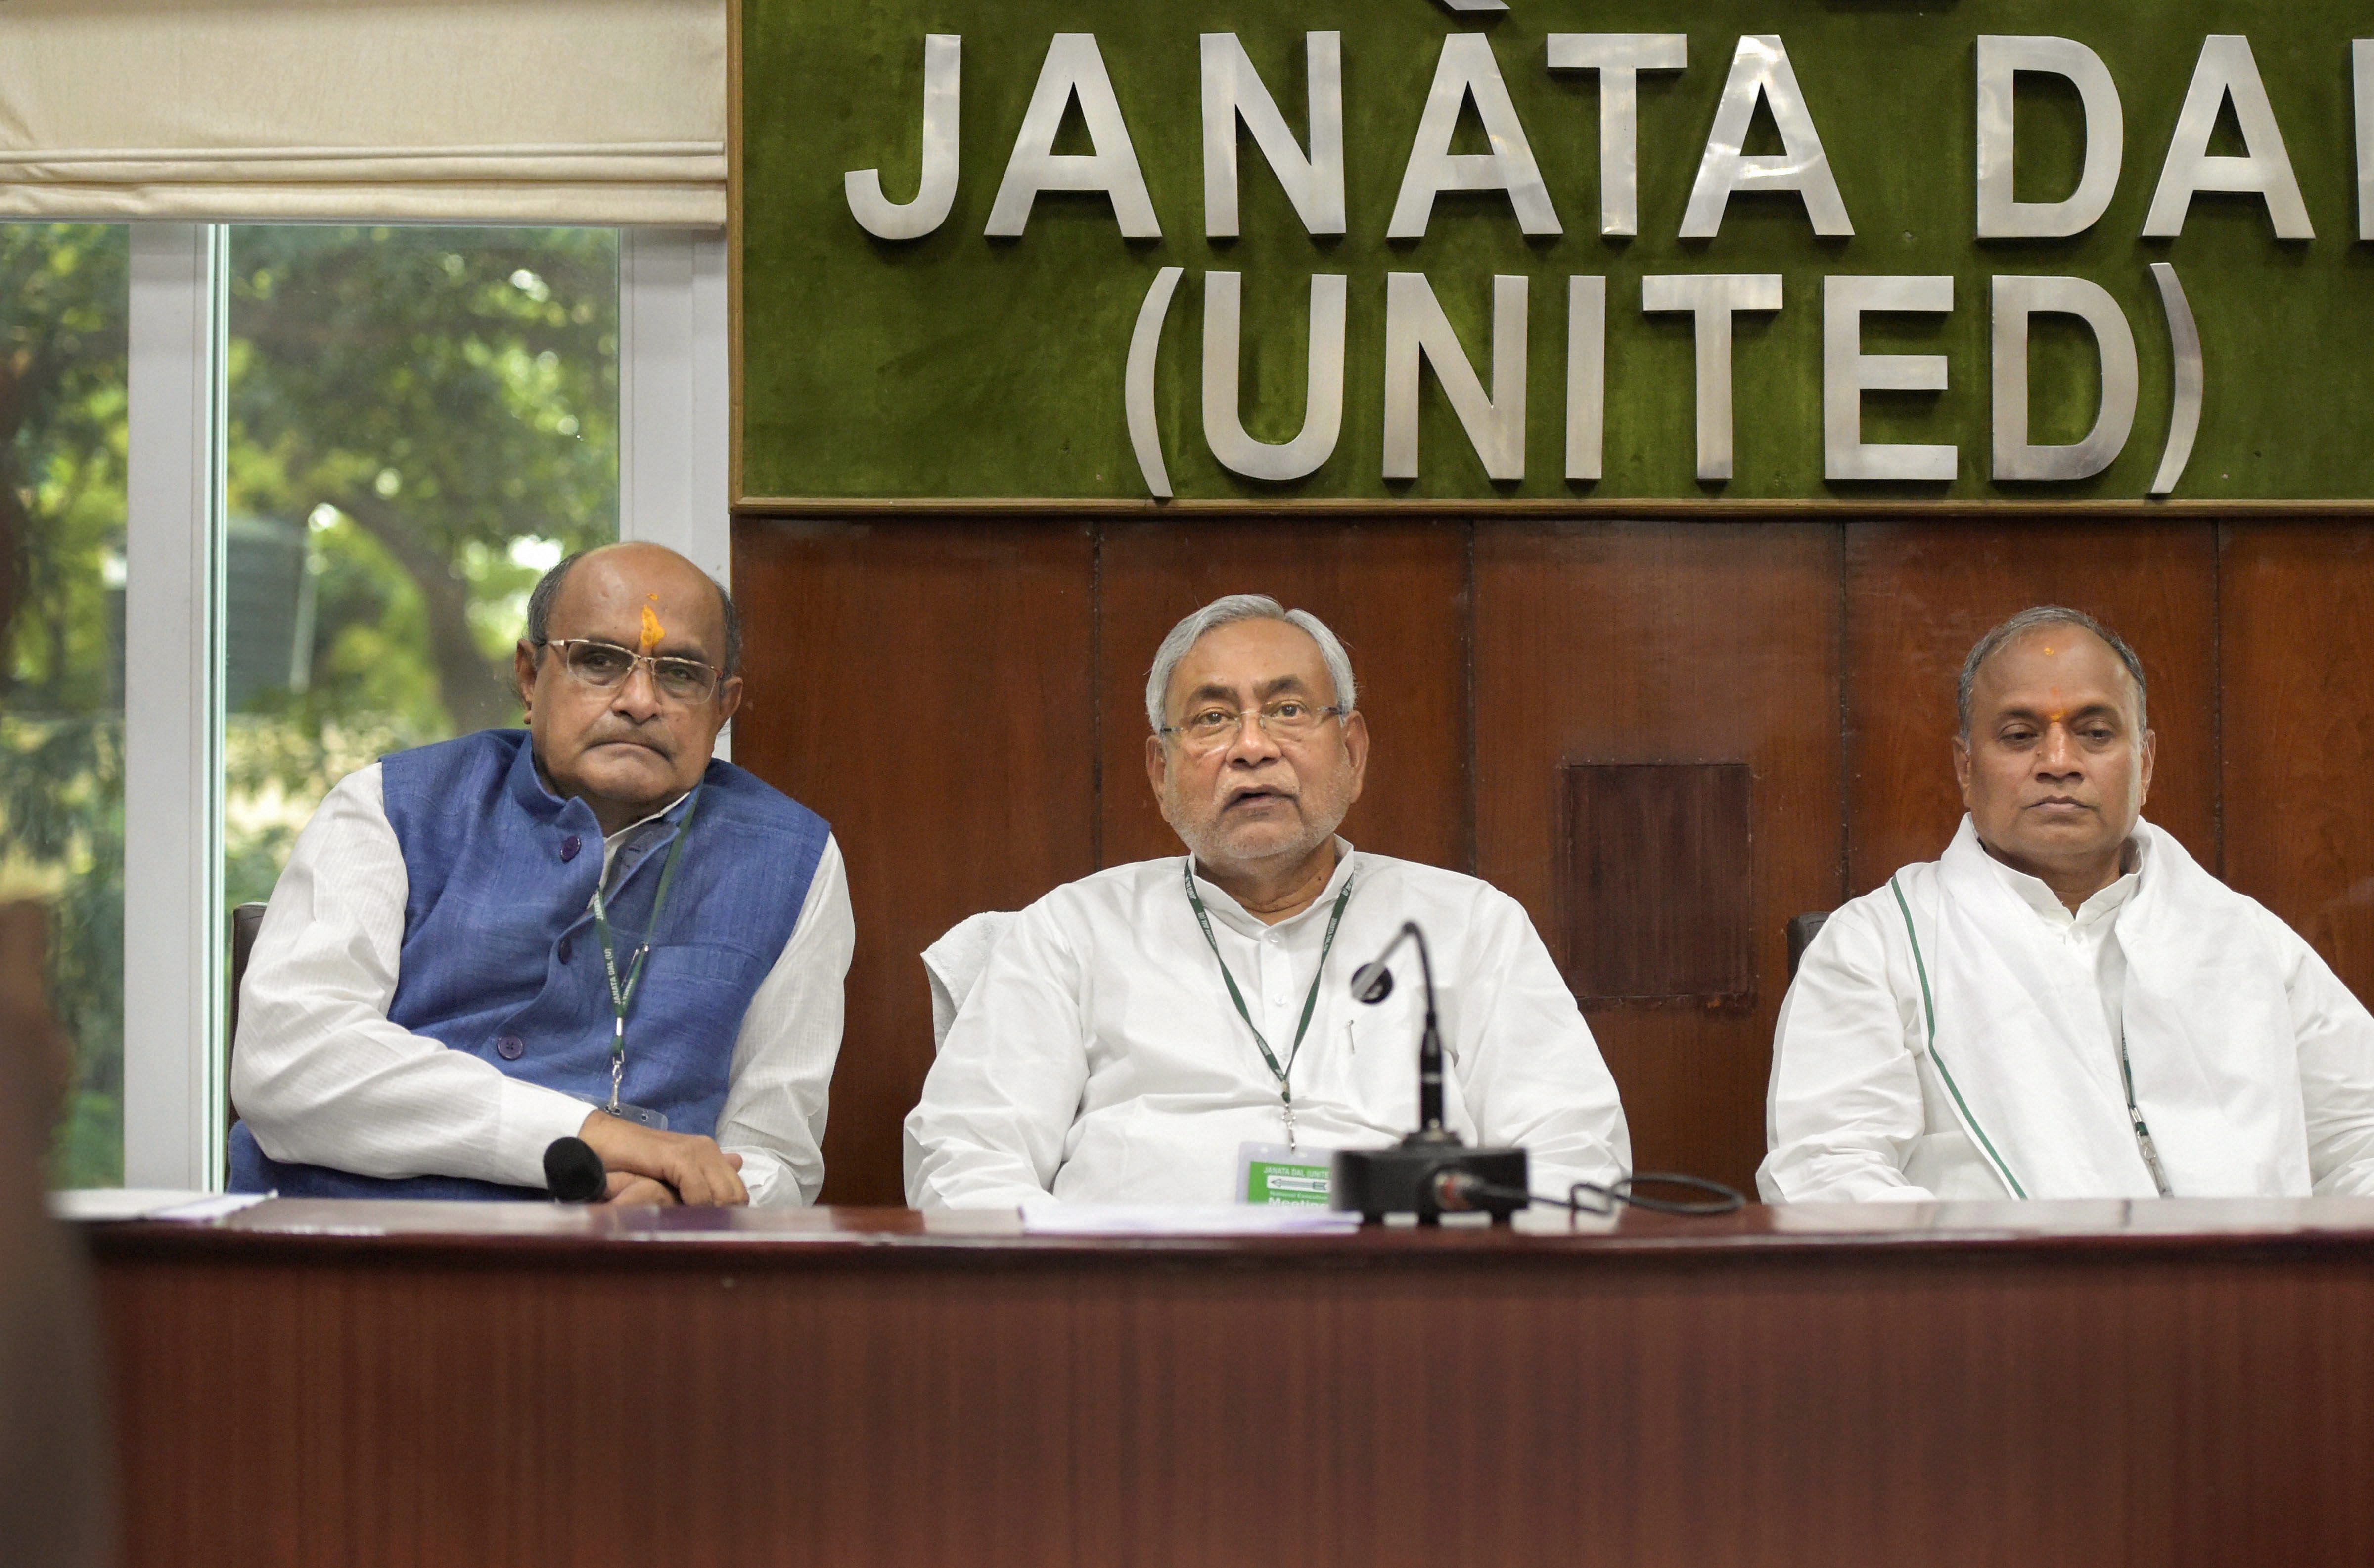 Bihar Chief Minister and JDU Chief Nitish Kumar, General Secretary K C Tyagi (L) and General Secretary (Organisation), RCP Singh during National Executive meeting at party headquarters in New Delhi. Credit: PTI Photo